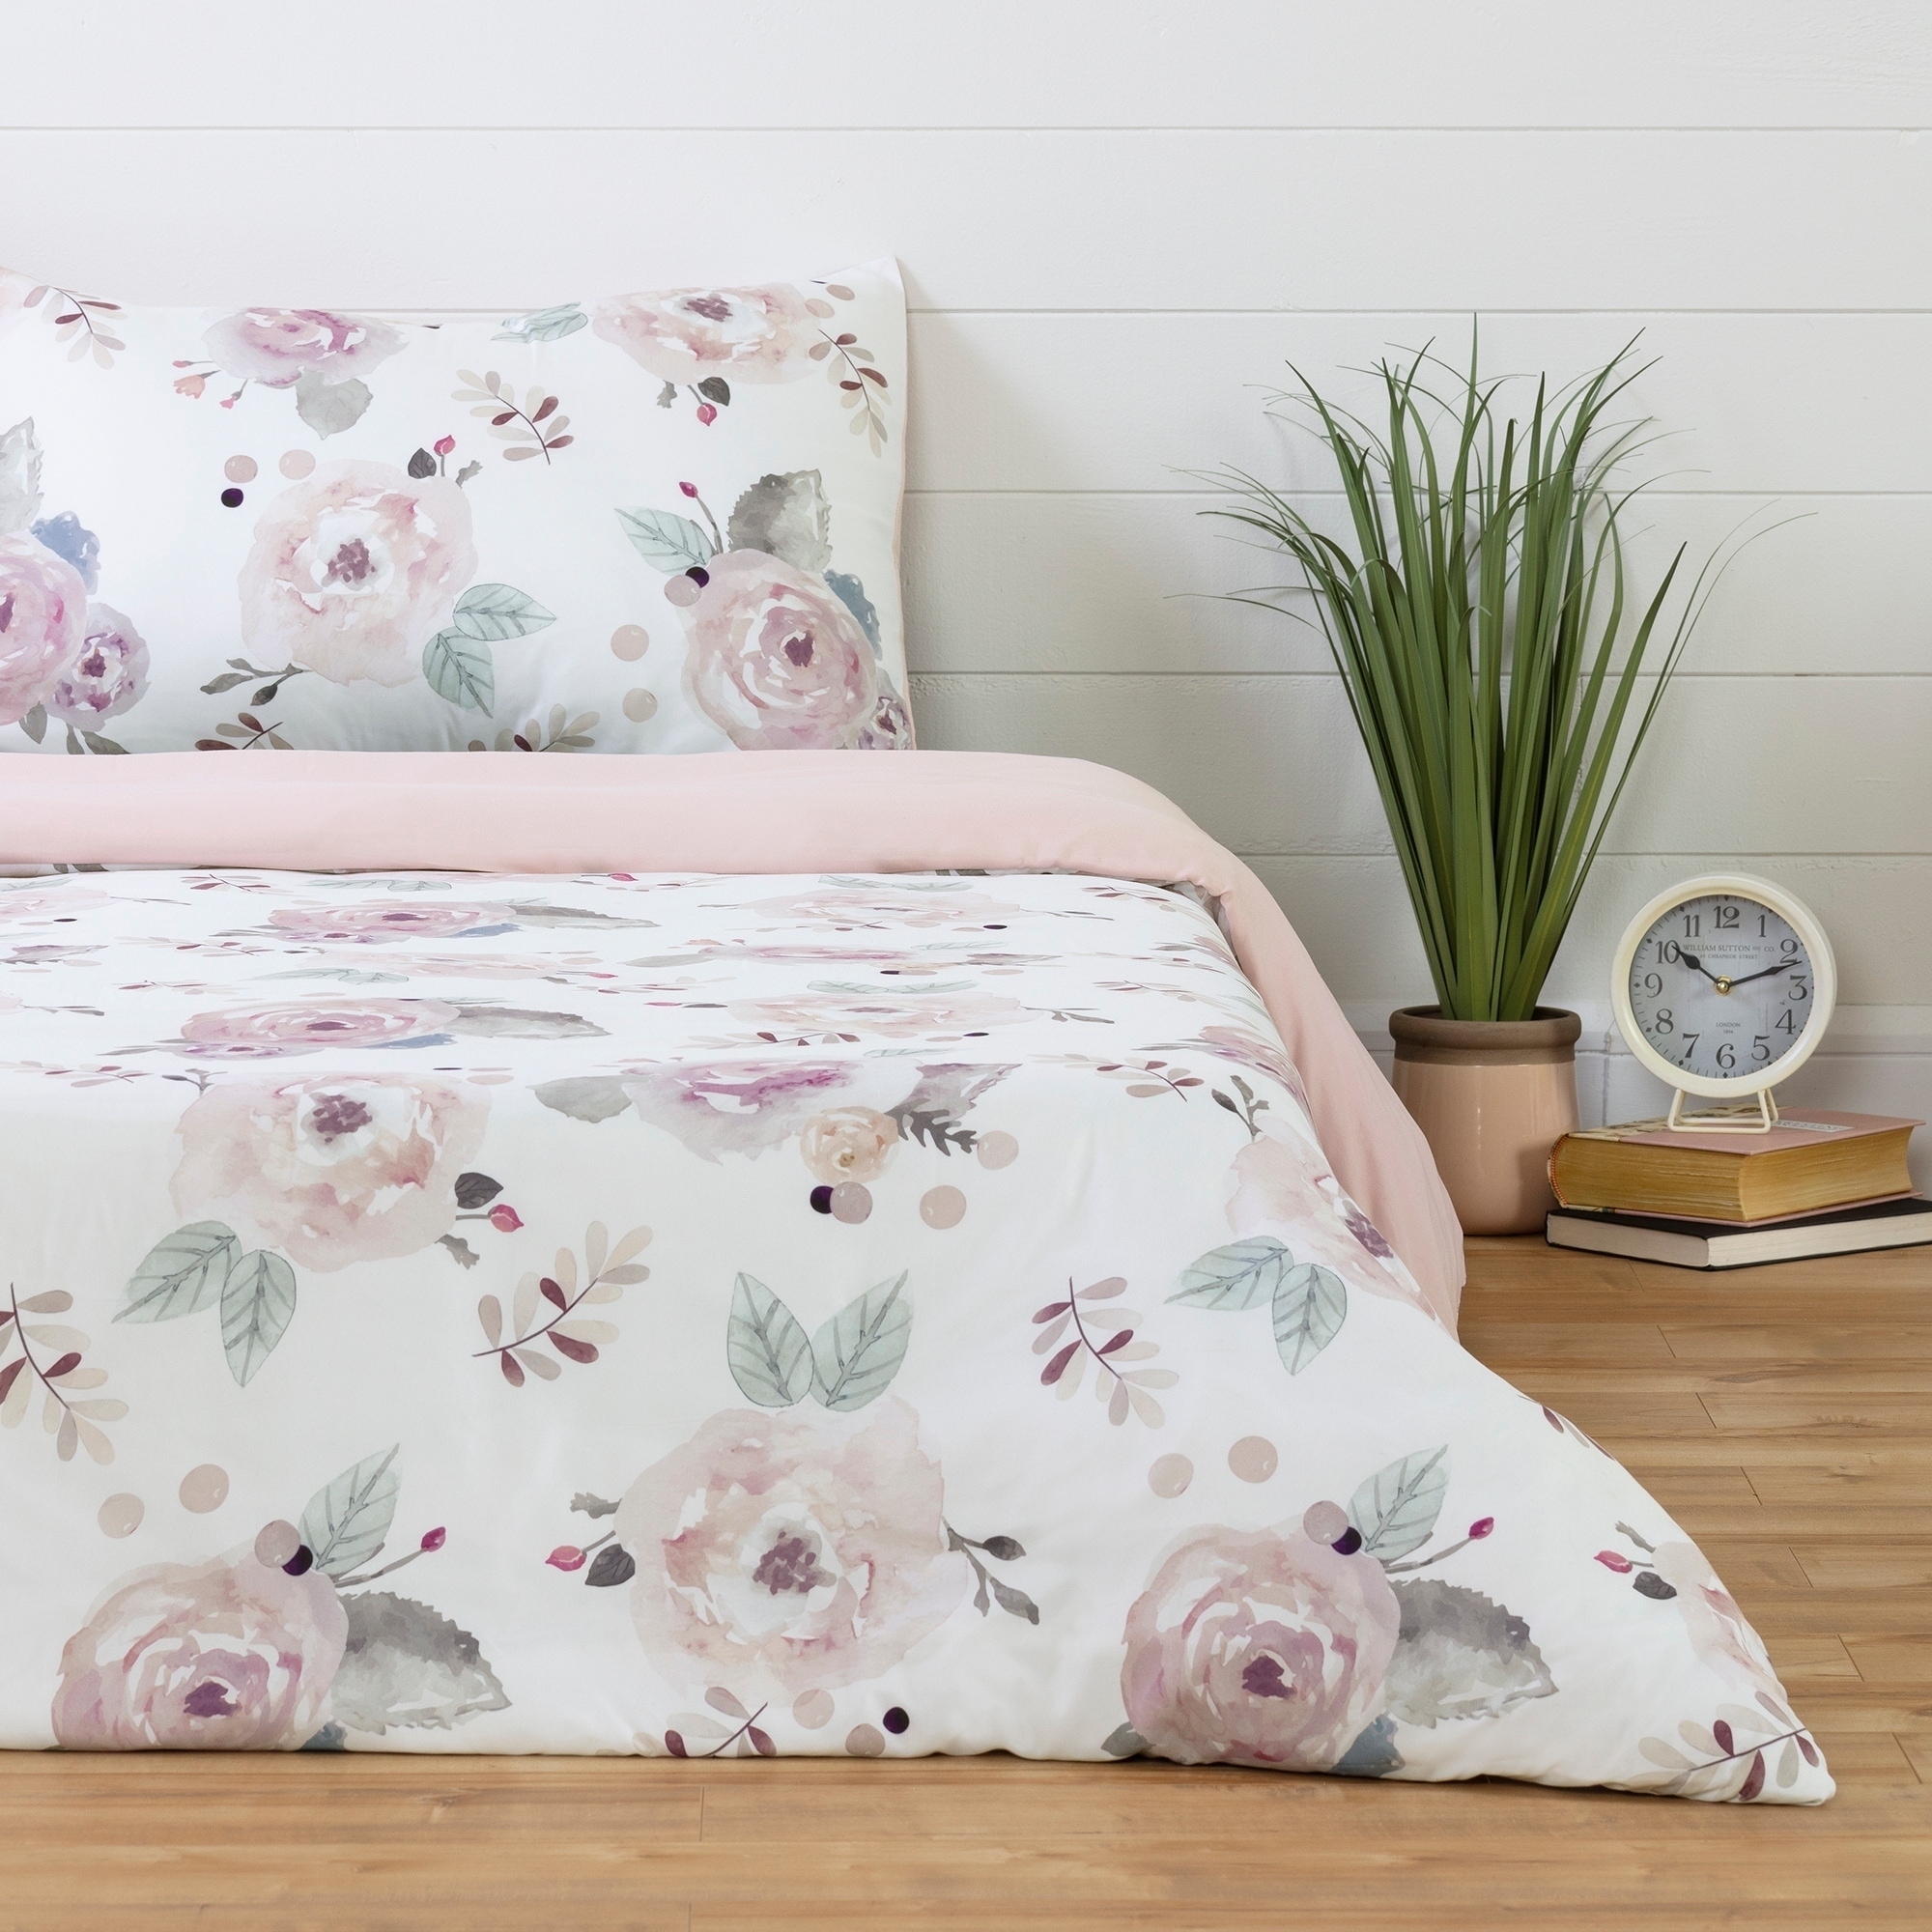 floral duvet covers king size